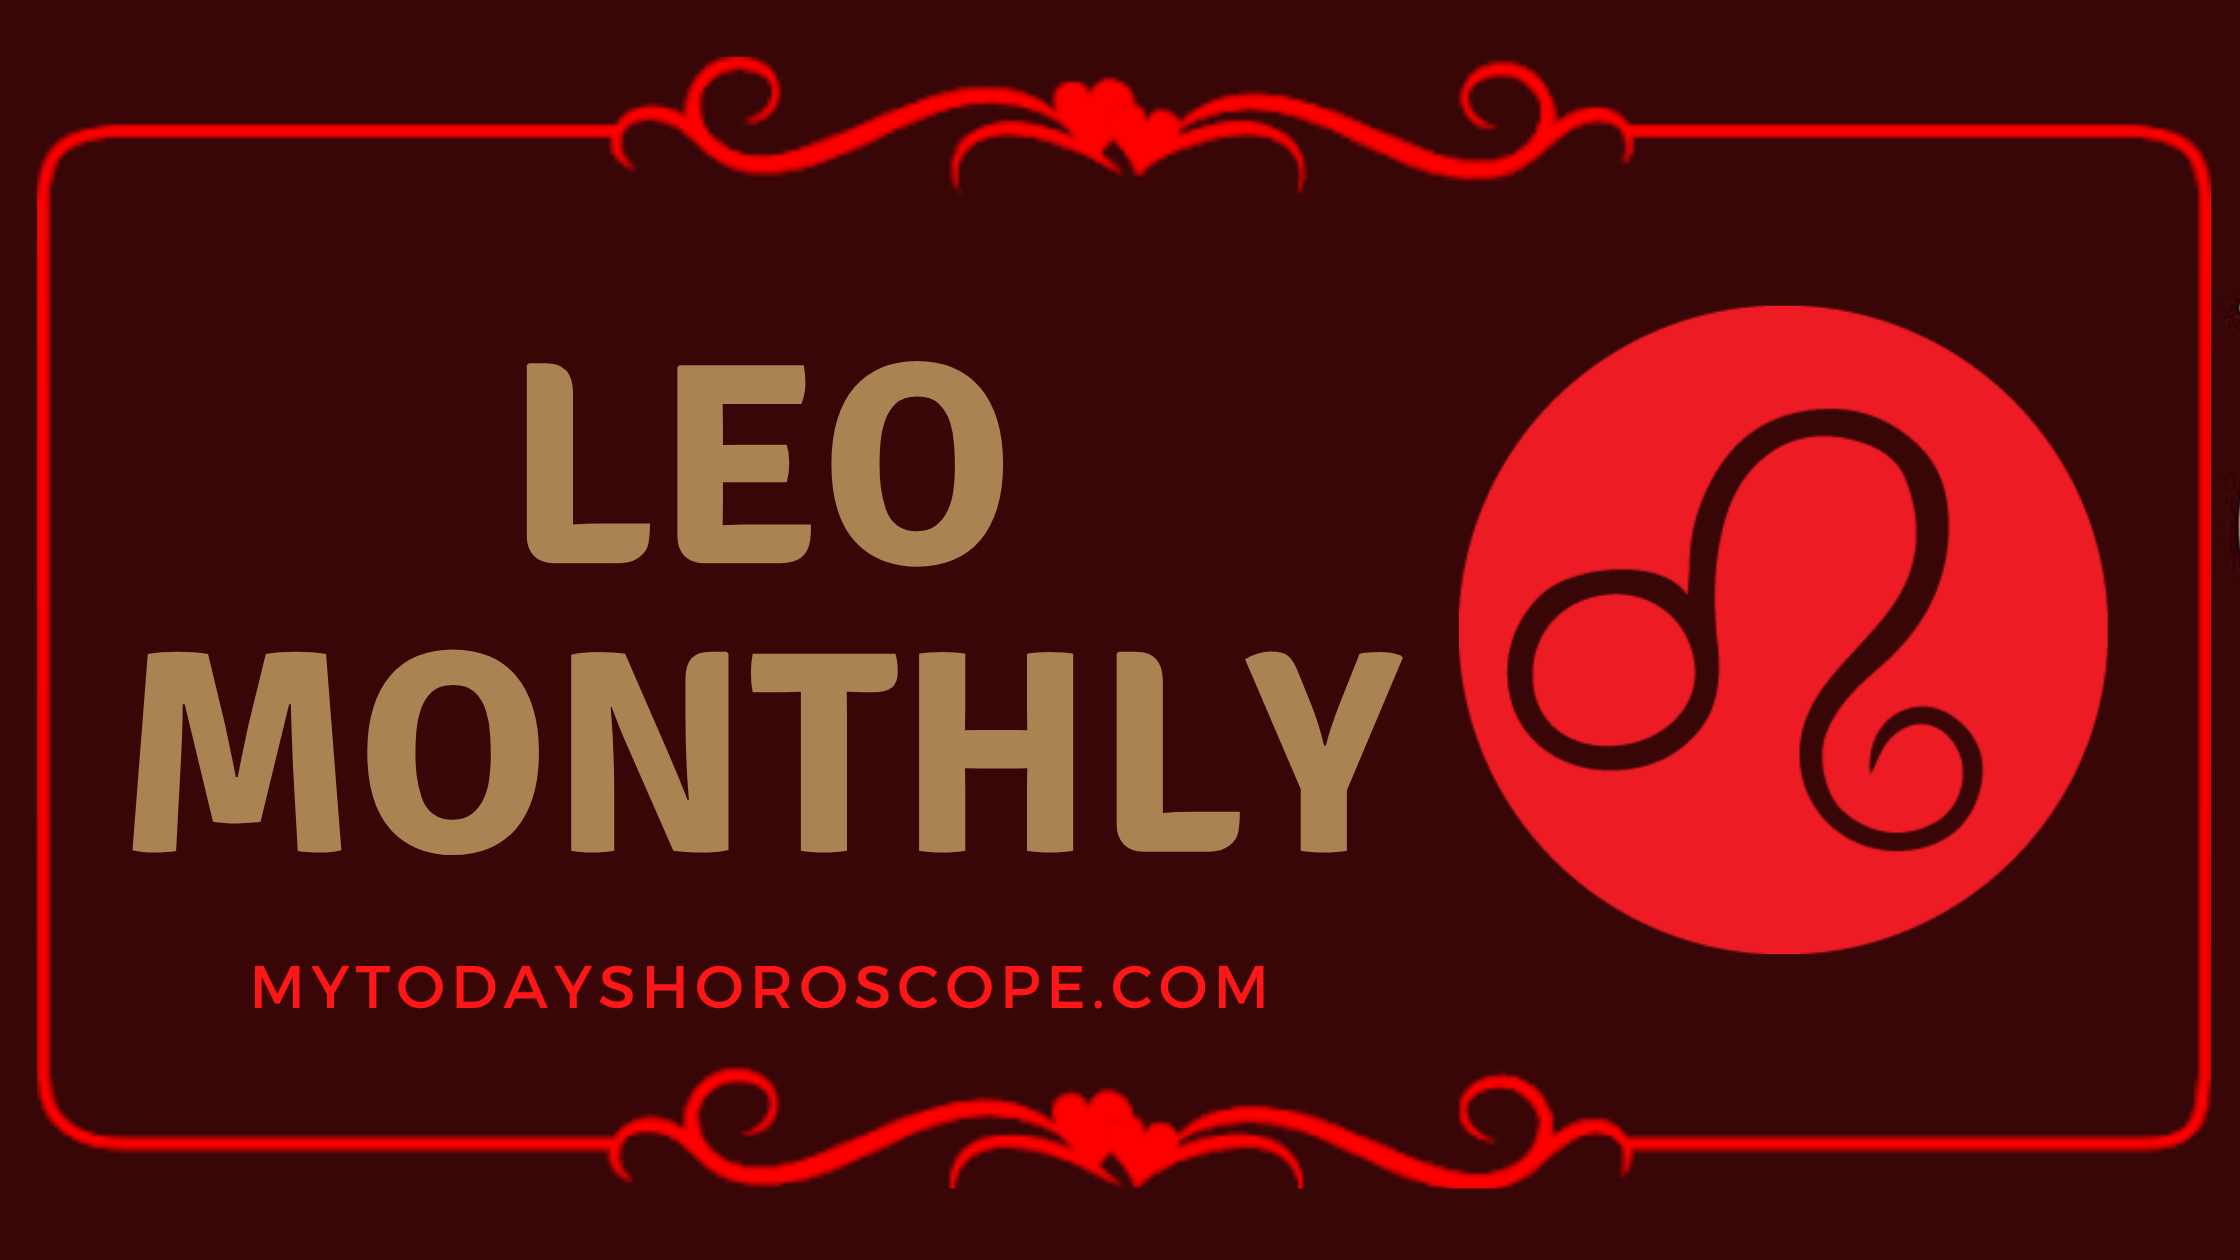 Leo Monthly Love, Work and Well Being Horoscope